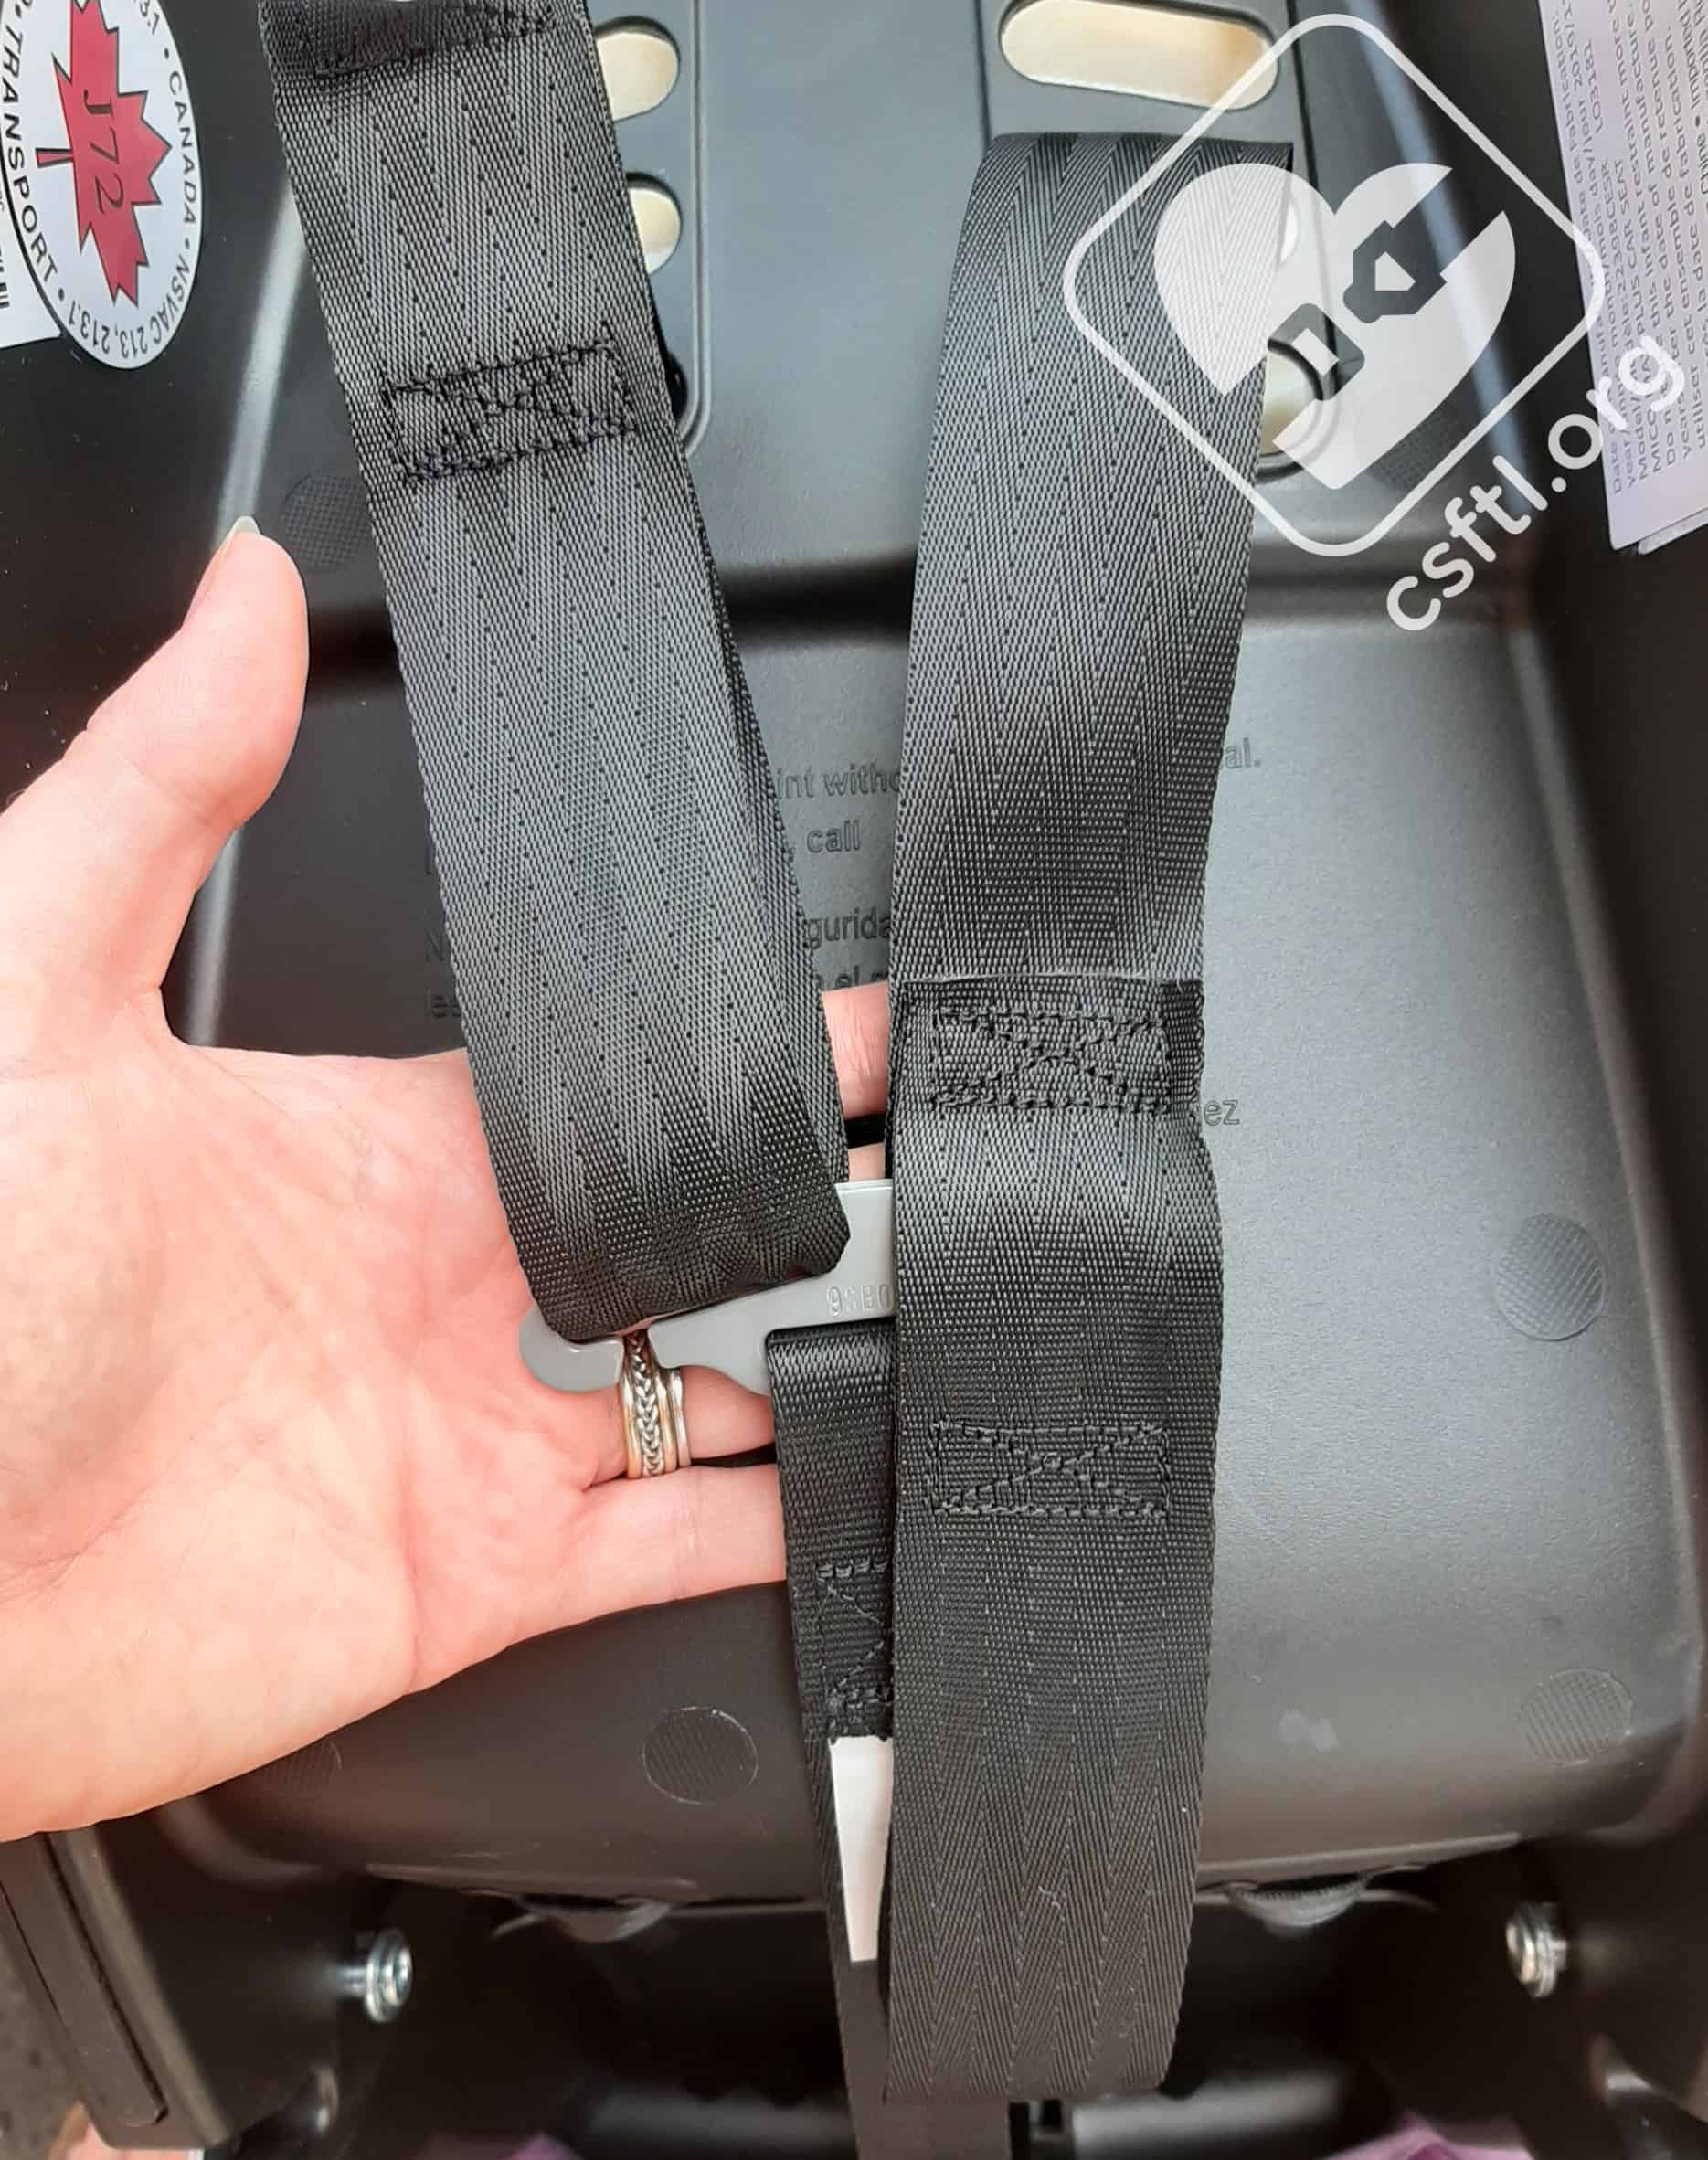 Maxi Cosi Mico AP/Eddie Bauer Seat Belt Strap Harness Buckle Replacement. 